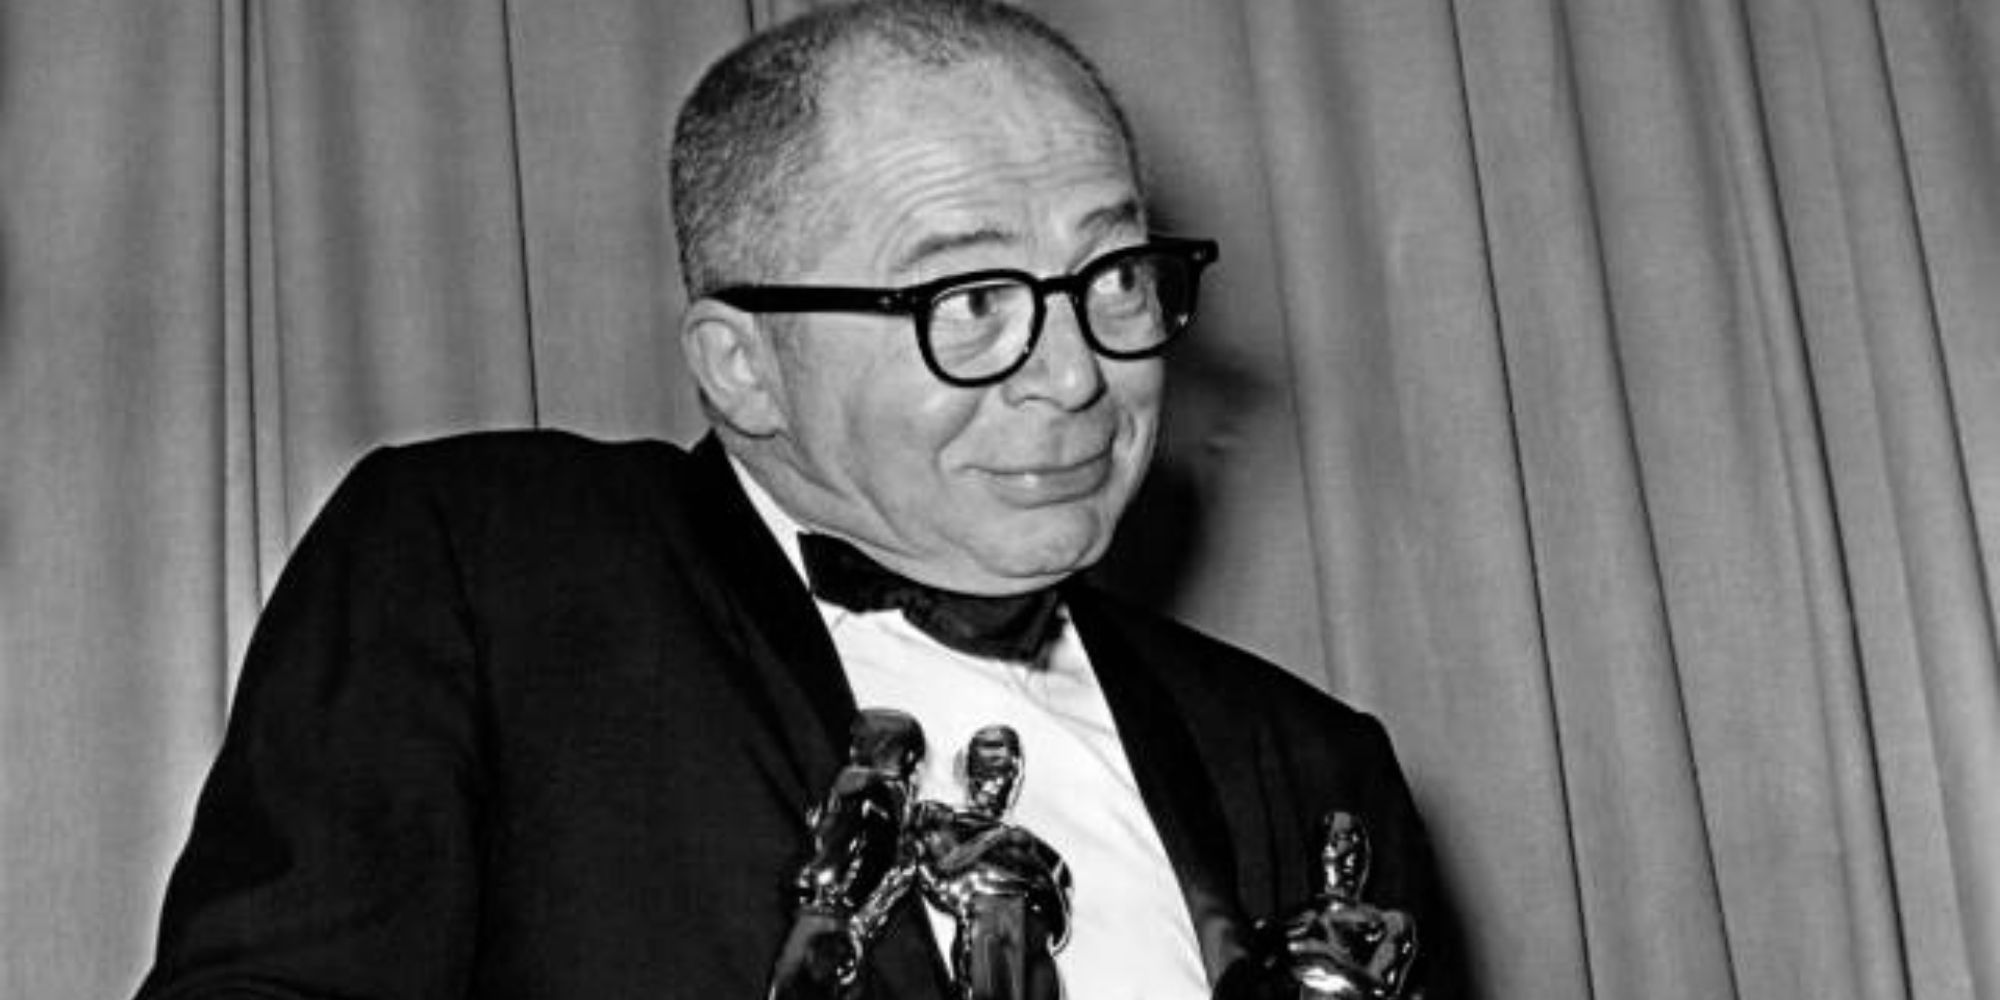 Billy Wilder with his Oscars at the 1961 Academy Awards via The Academy of Motion Pictures and Science 